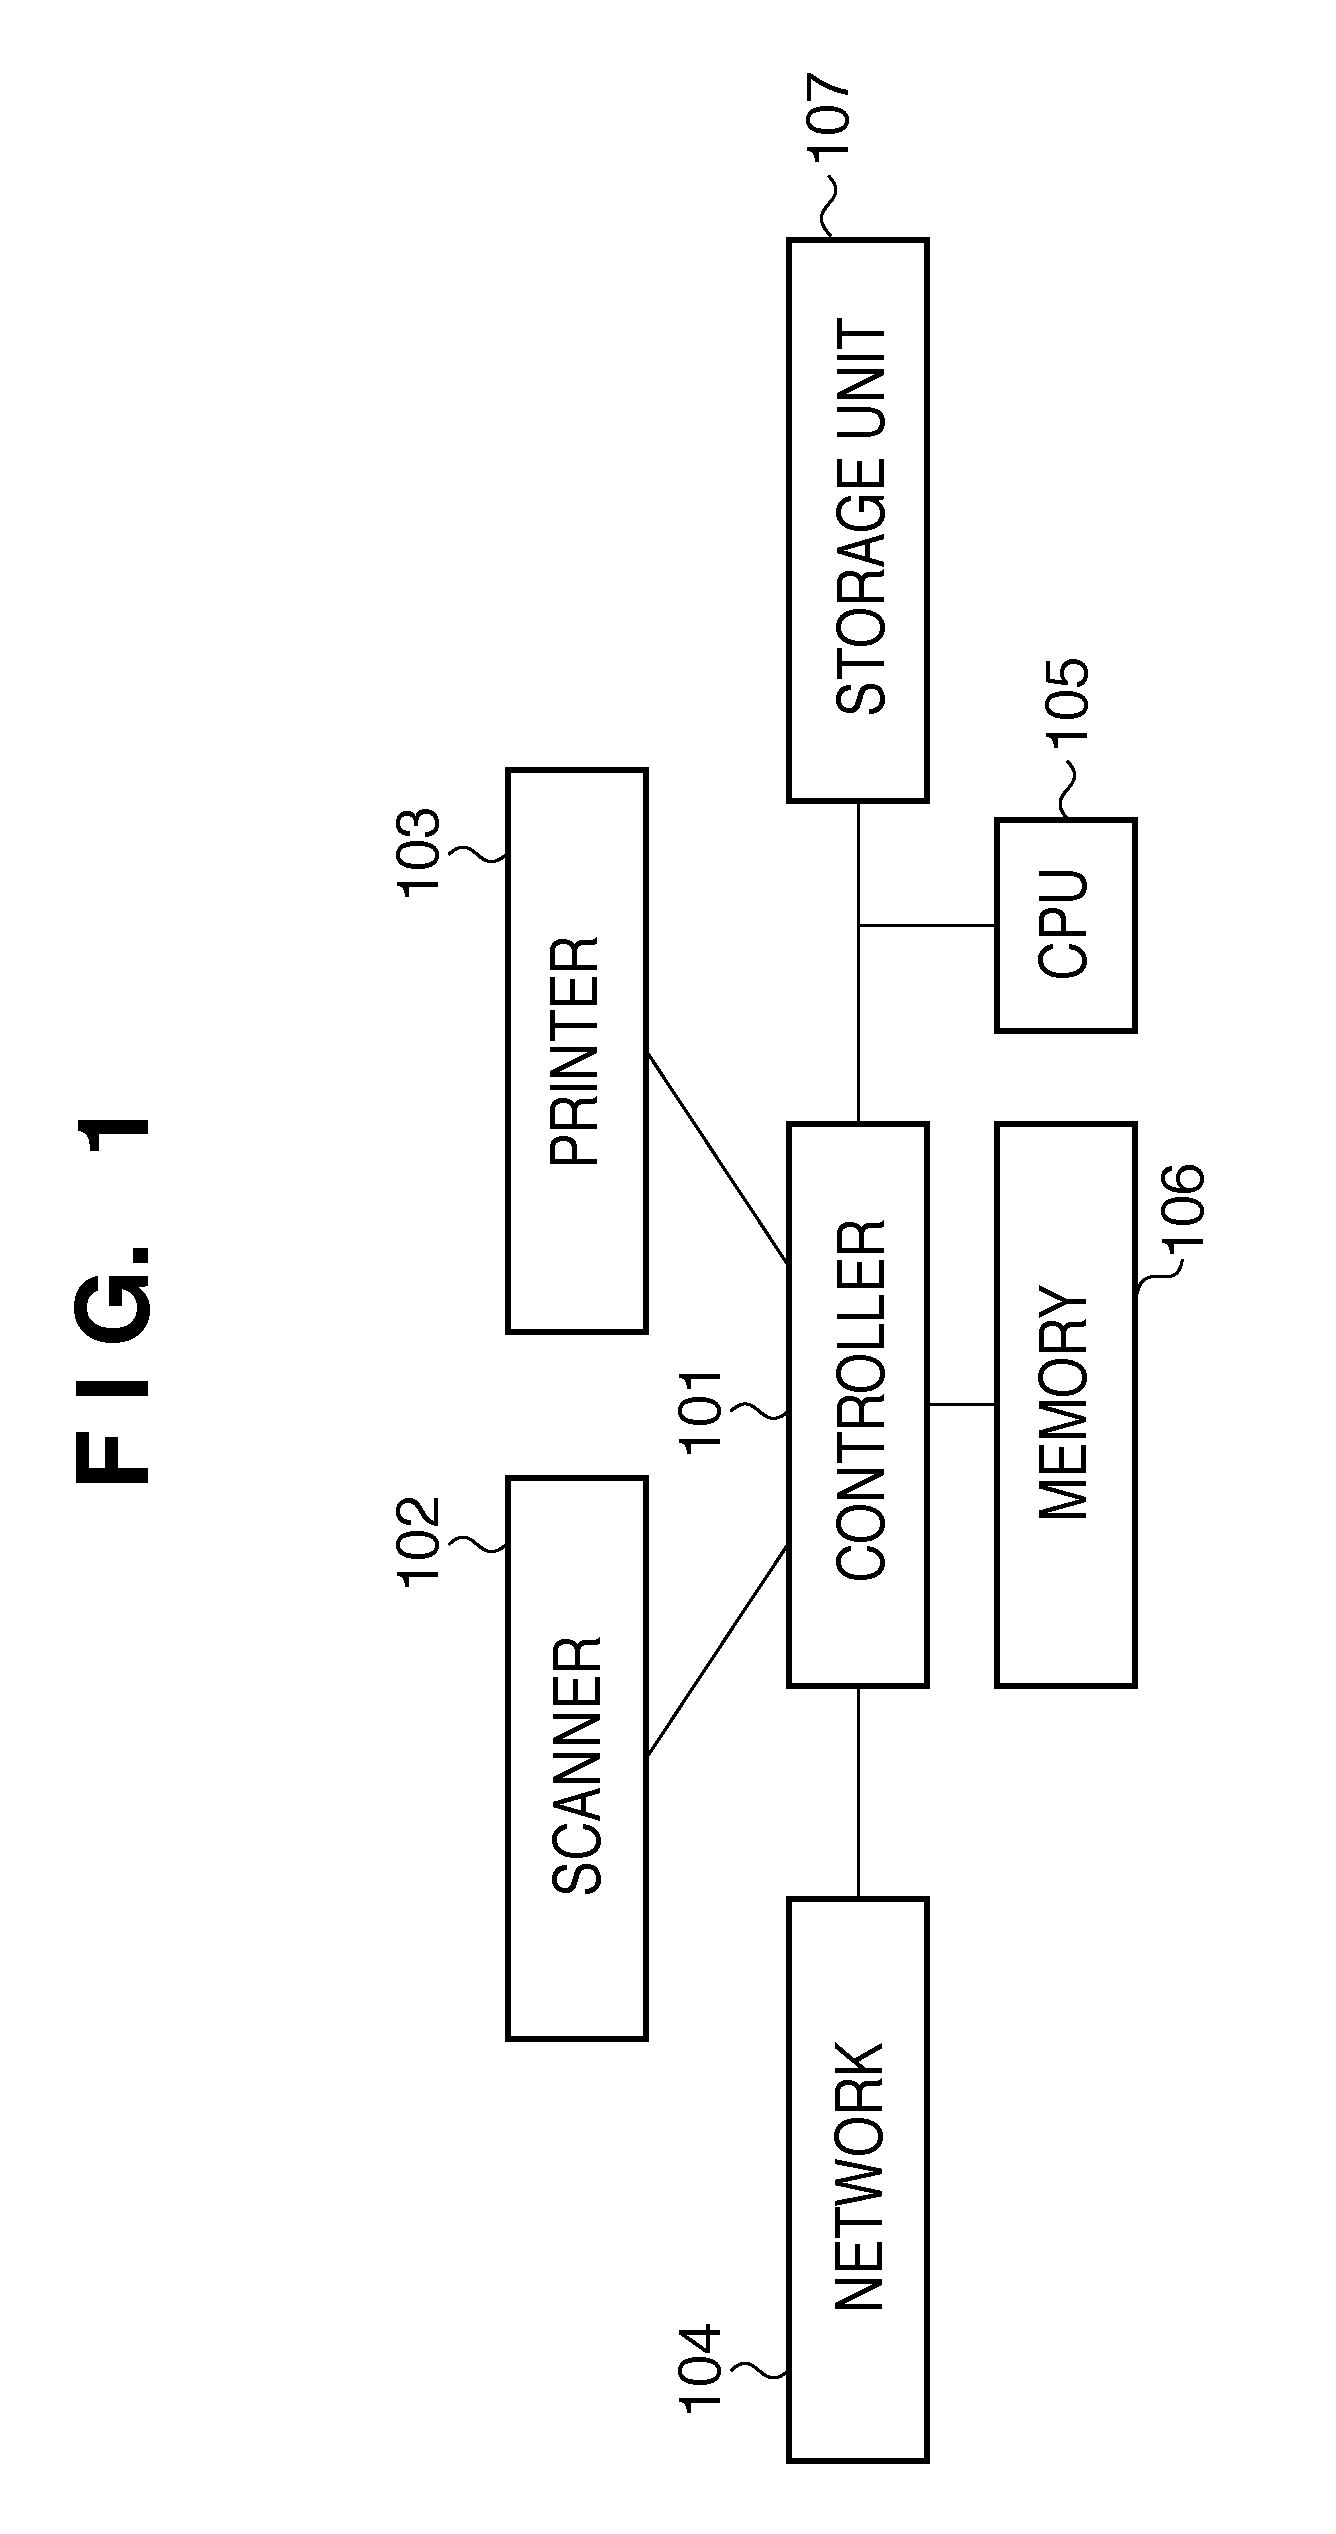 Image processing apparatus, compression method, and storage medium for storing programs thereof